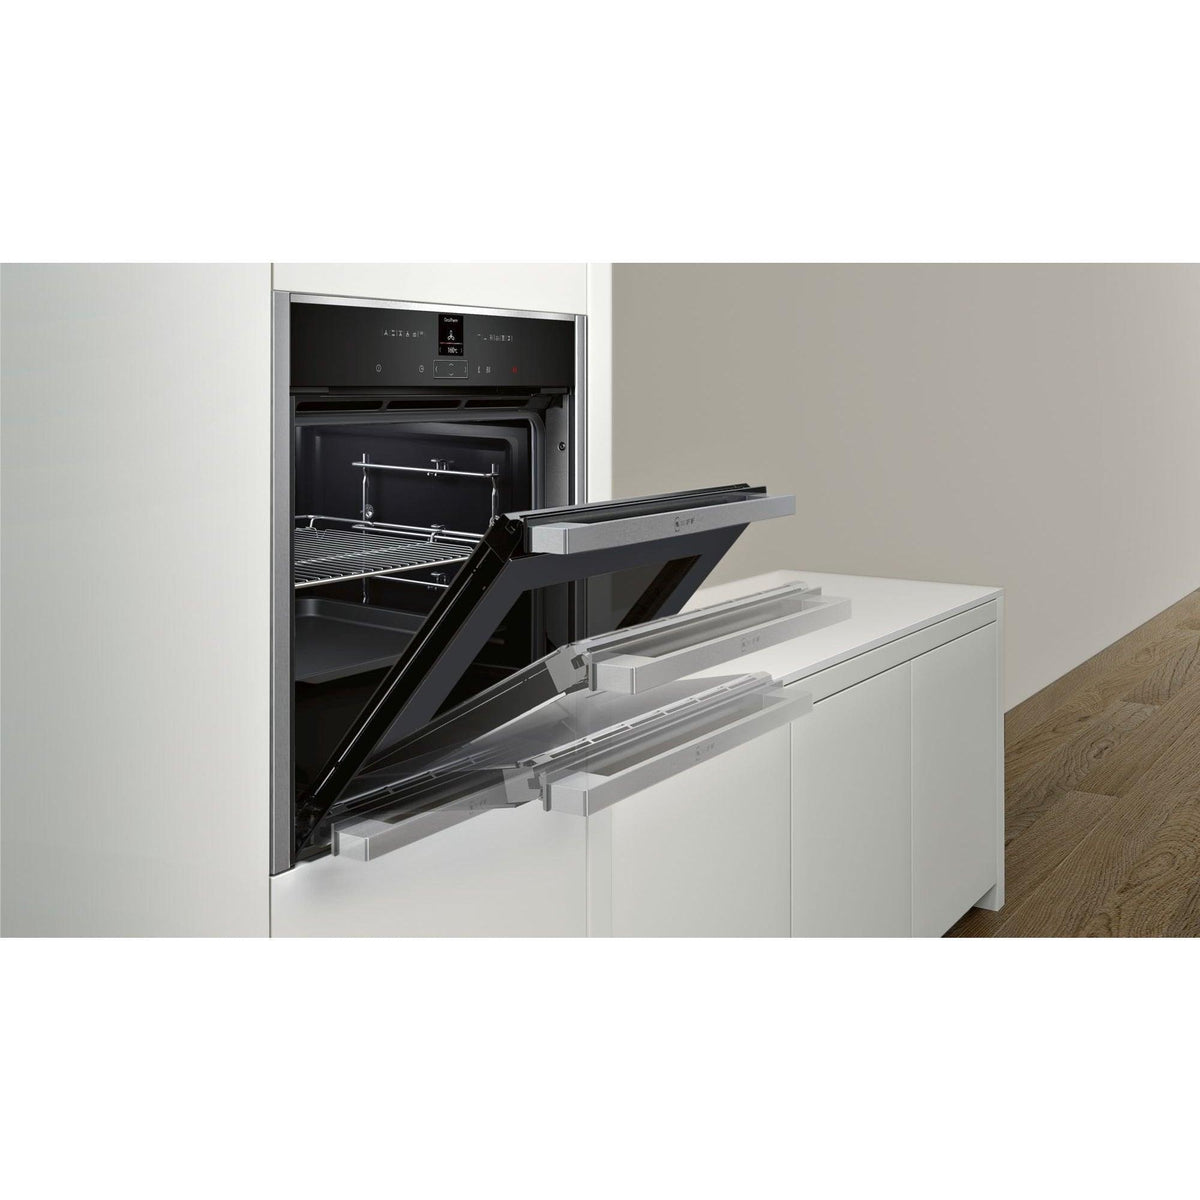 Neff N70 Built-In Electric Single Oven - Stainless Steel | B57CR22N0B from DID Electrical - guaranteed Irish, guaranteed quality service. (6890747756732)